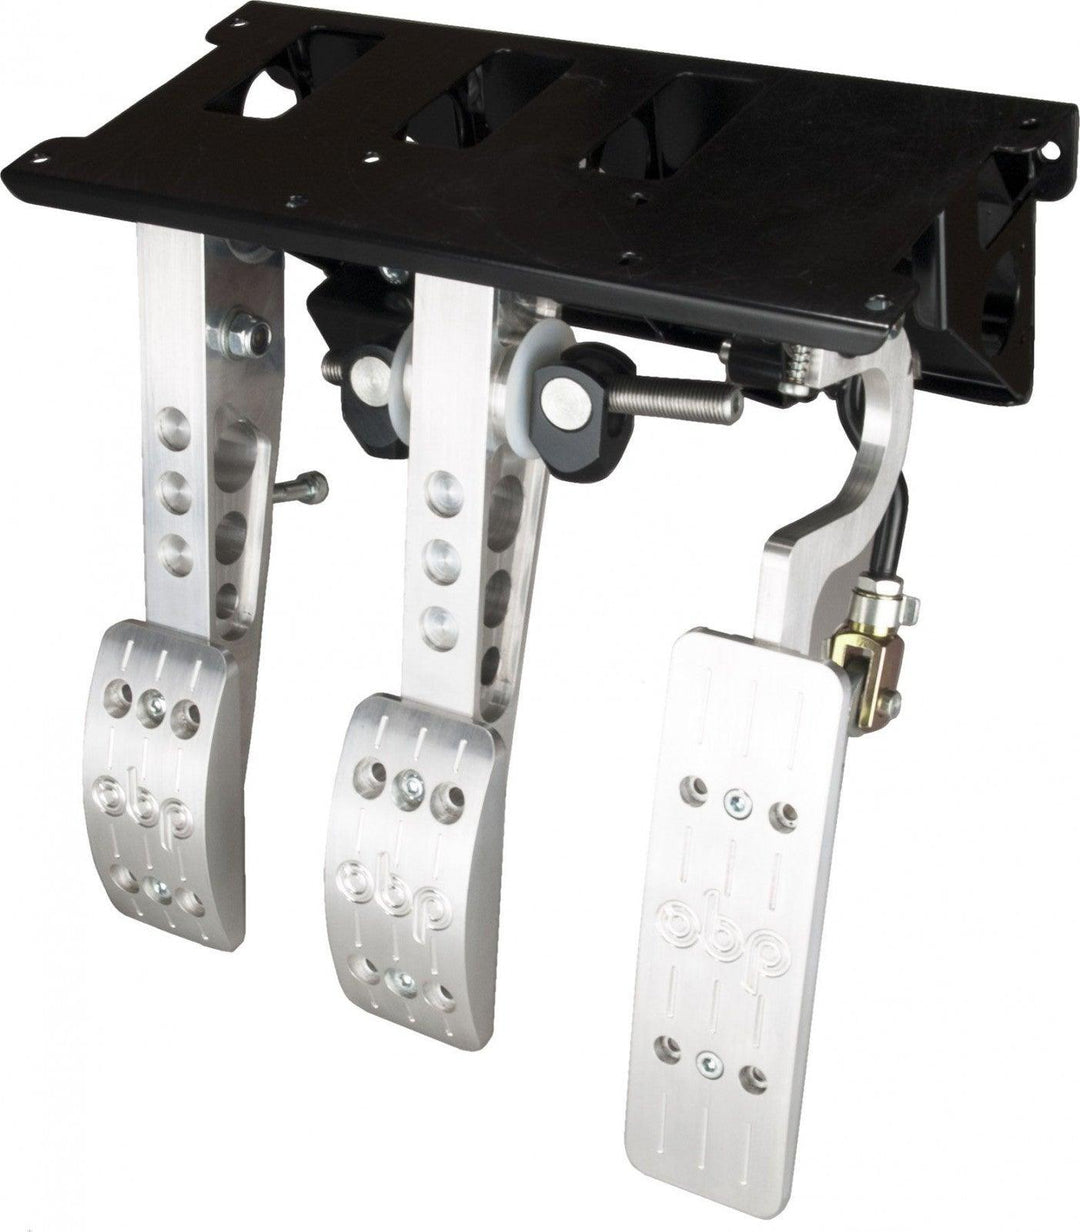 obp Motorsport Pro-Race V2 3 Pedal System - Top Mounted Bulkhead Fit - Attacking the Clock Racing